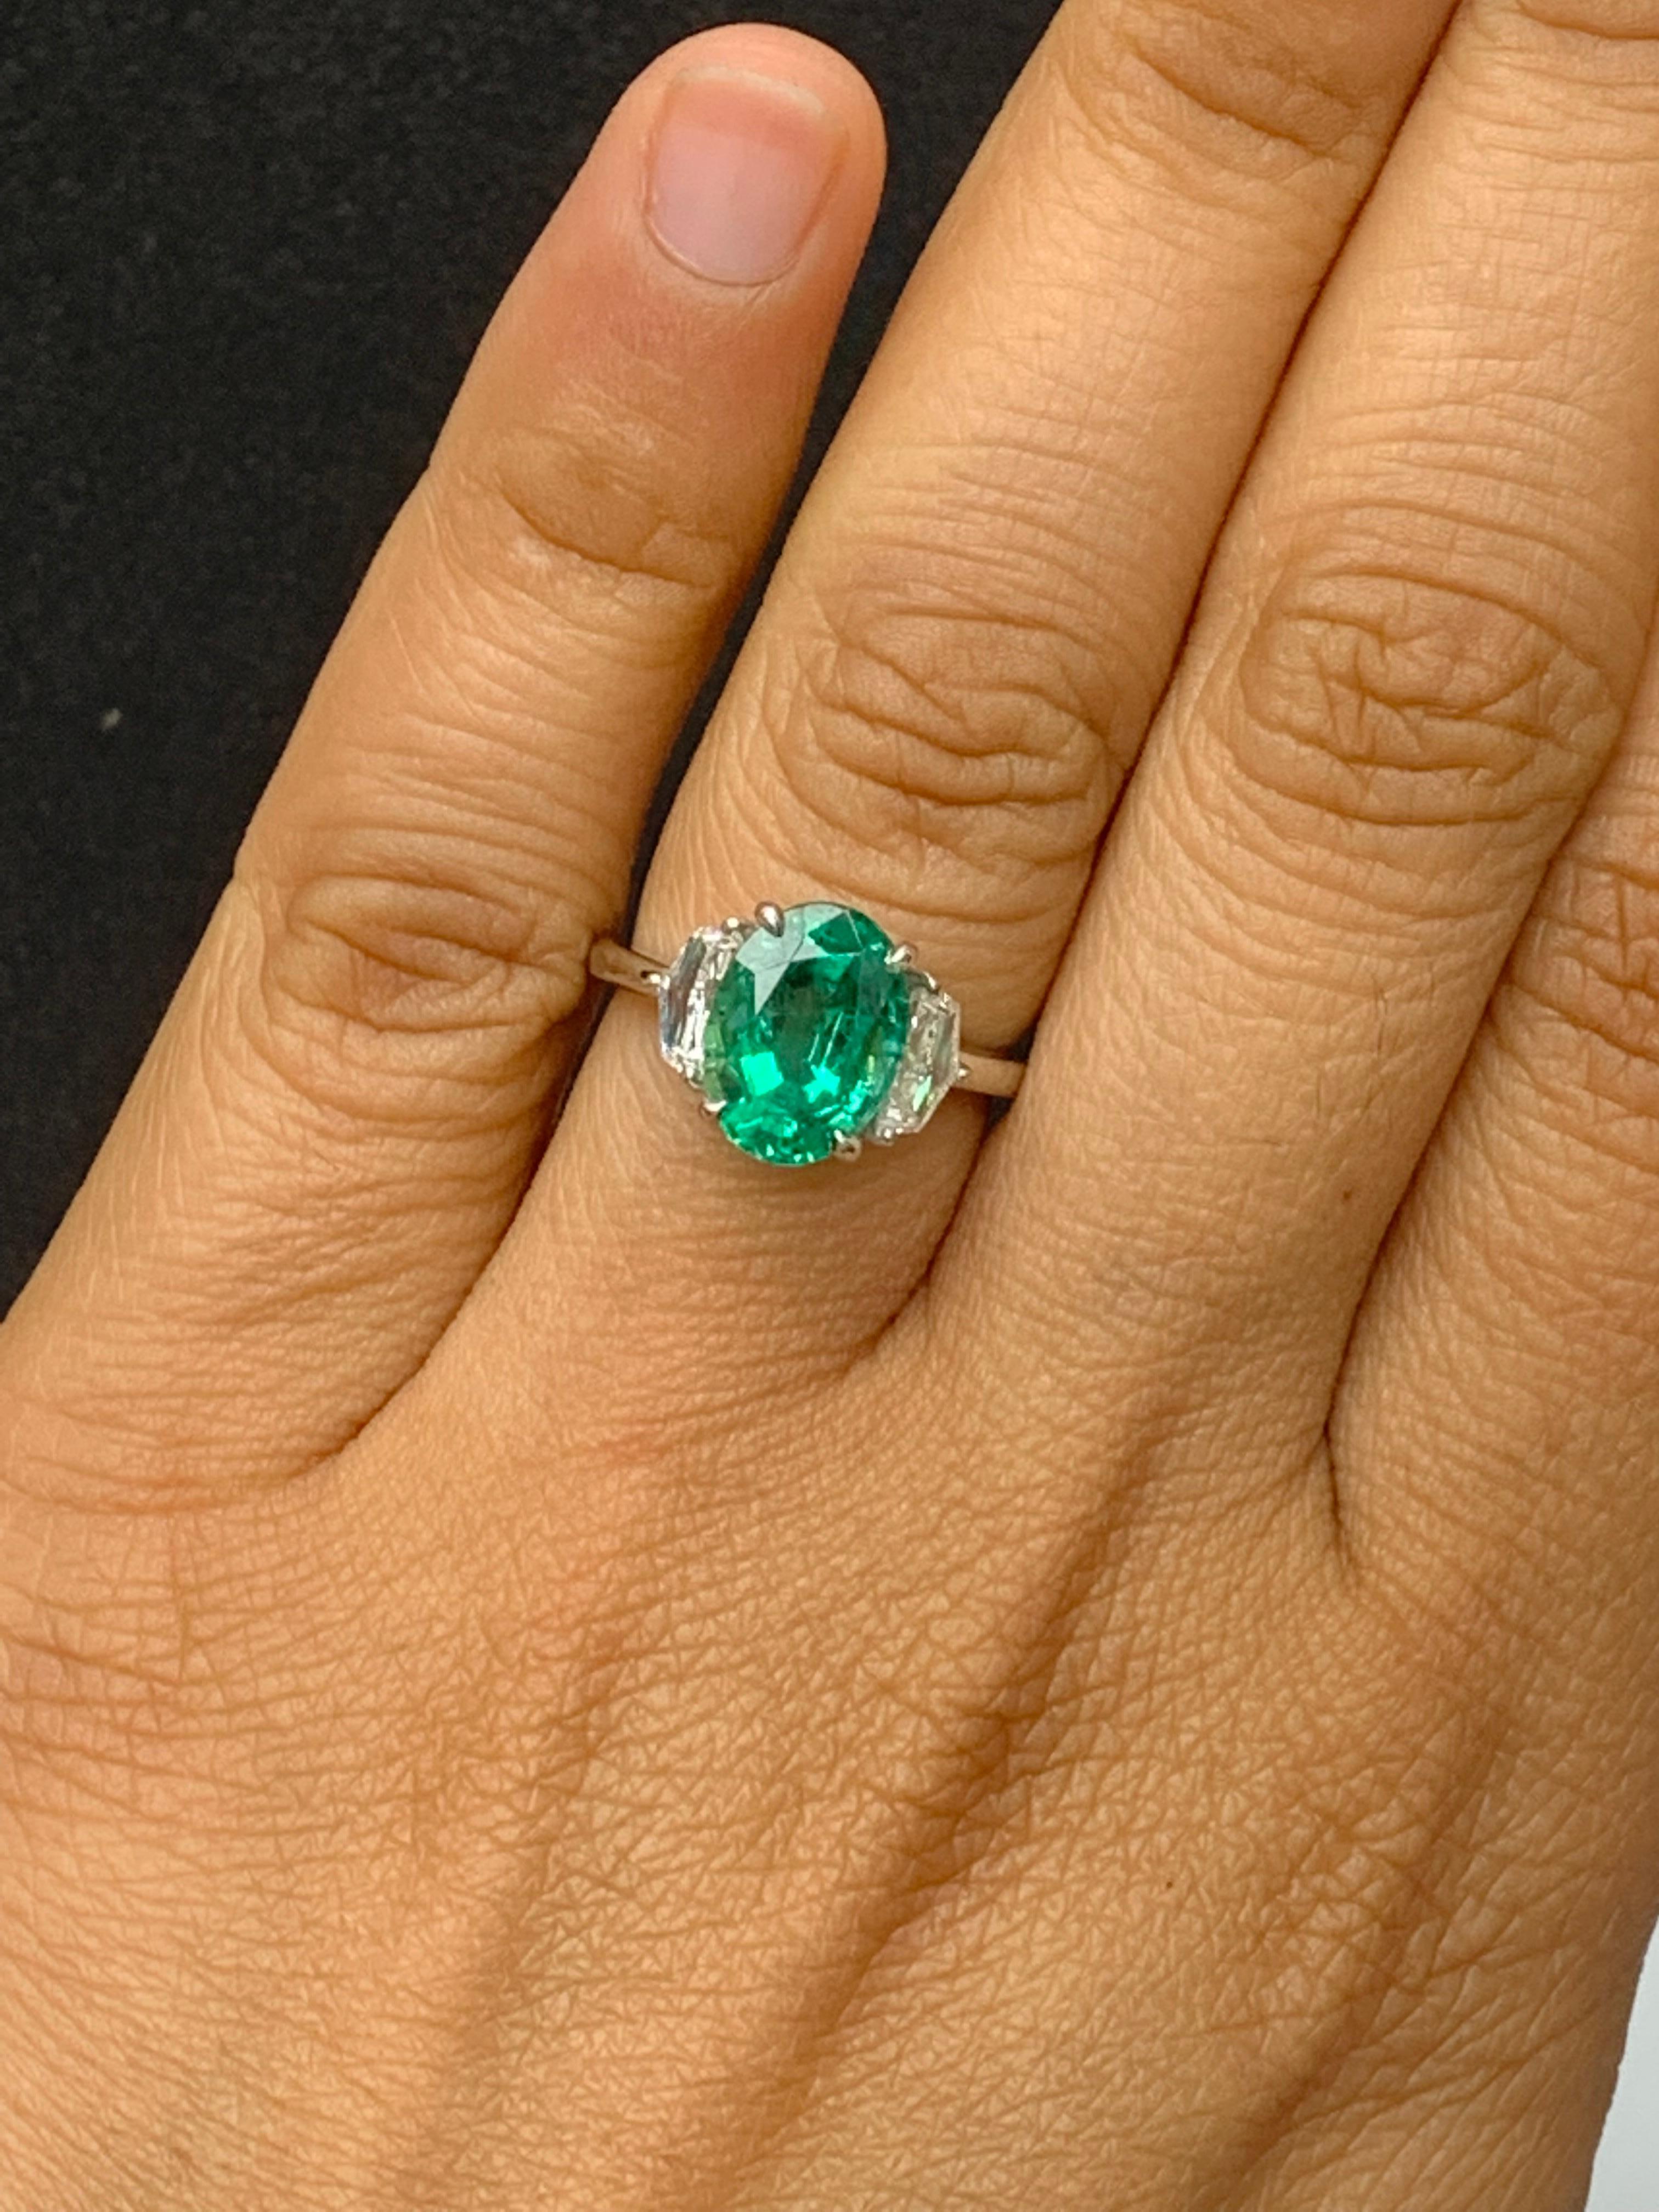 Certified 2.72 Carat Oval Cut Emerald Diamond Engagement Ring in Platinum For Sale 3